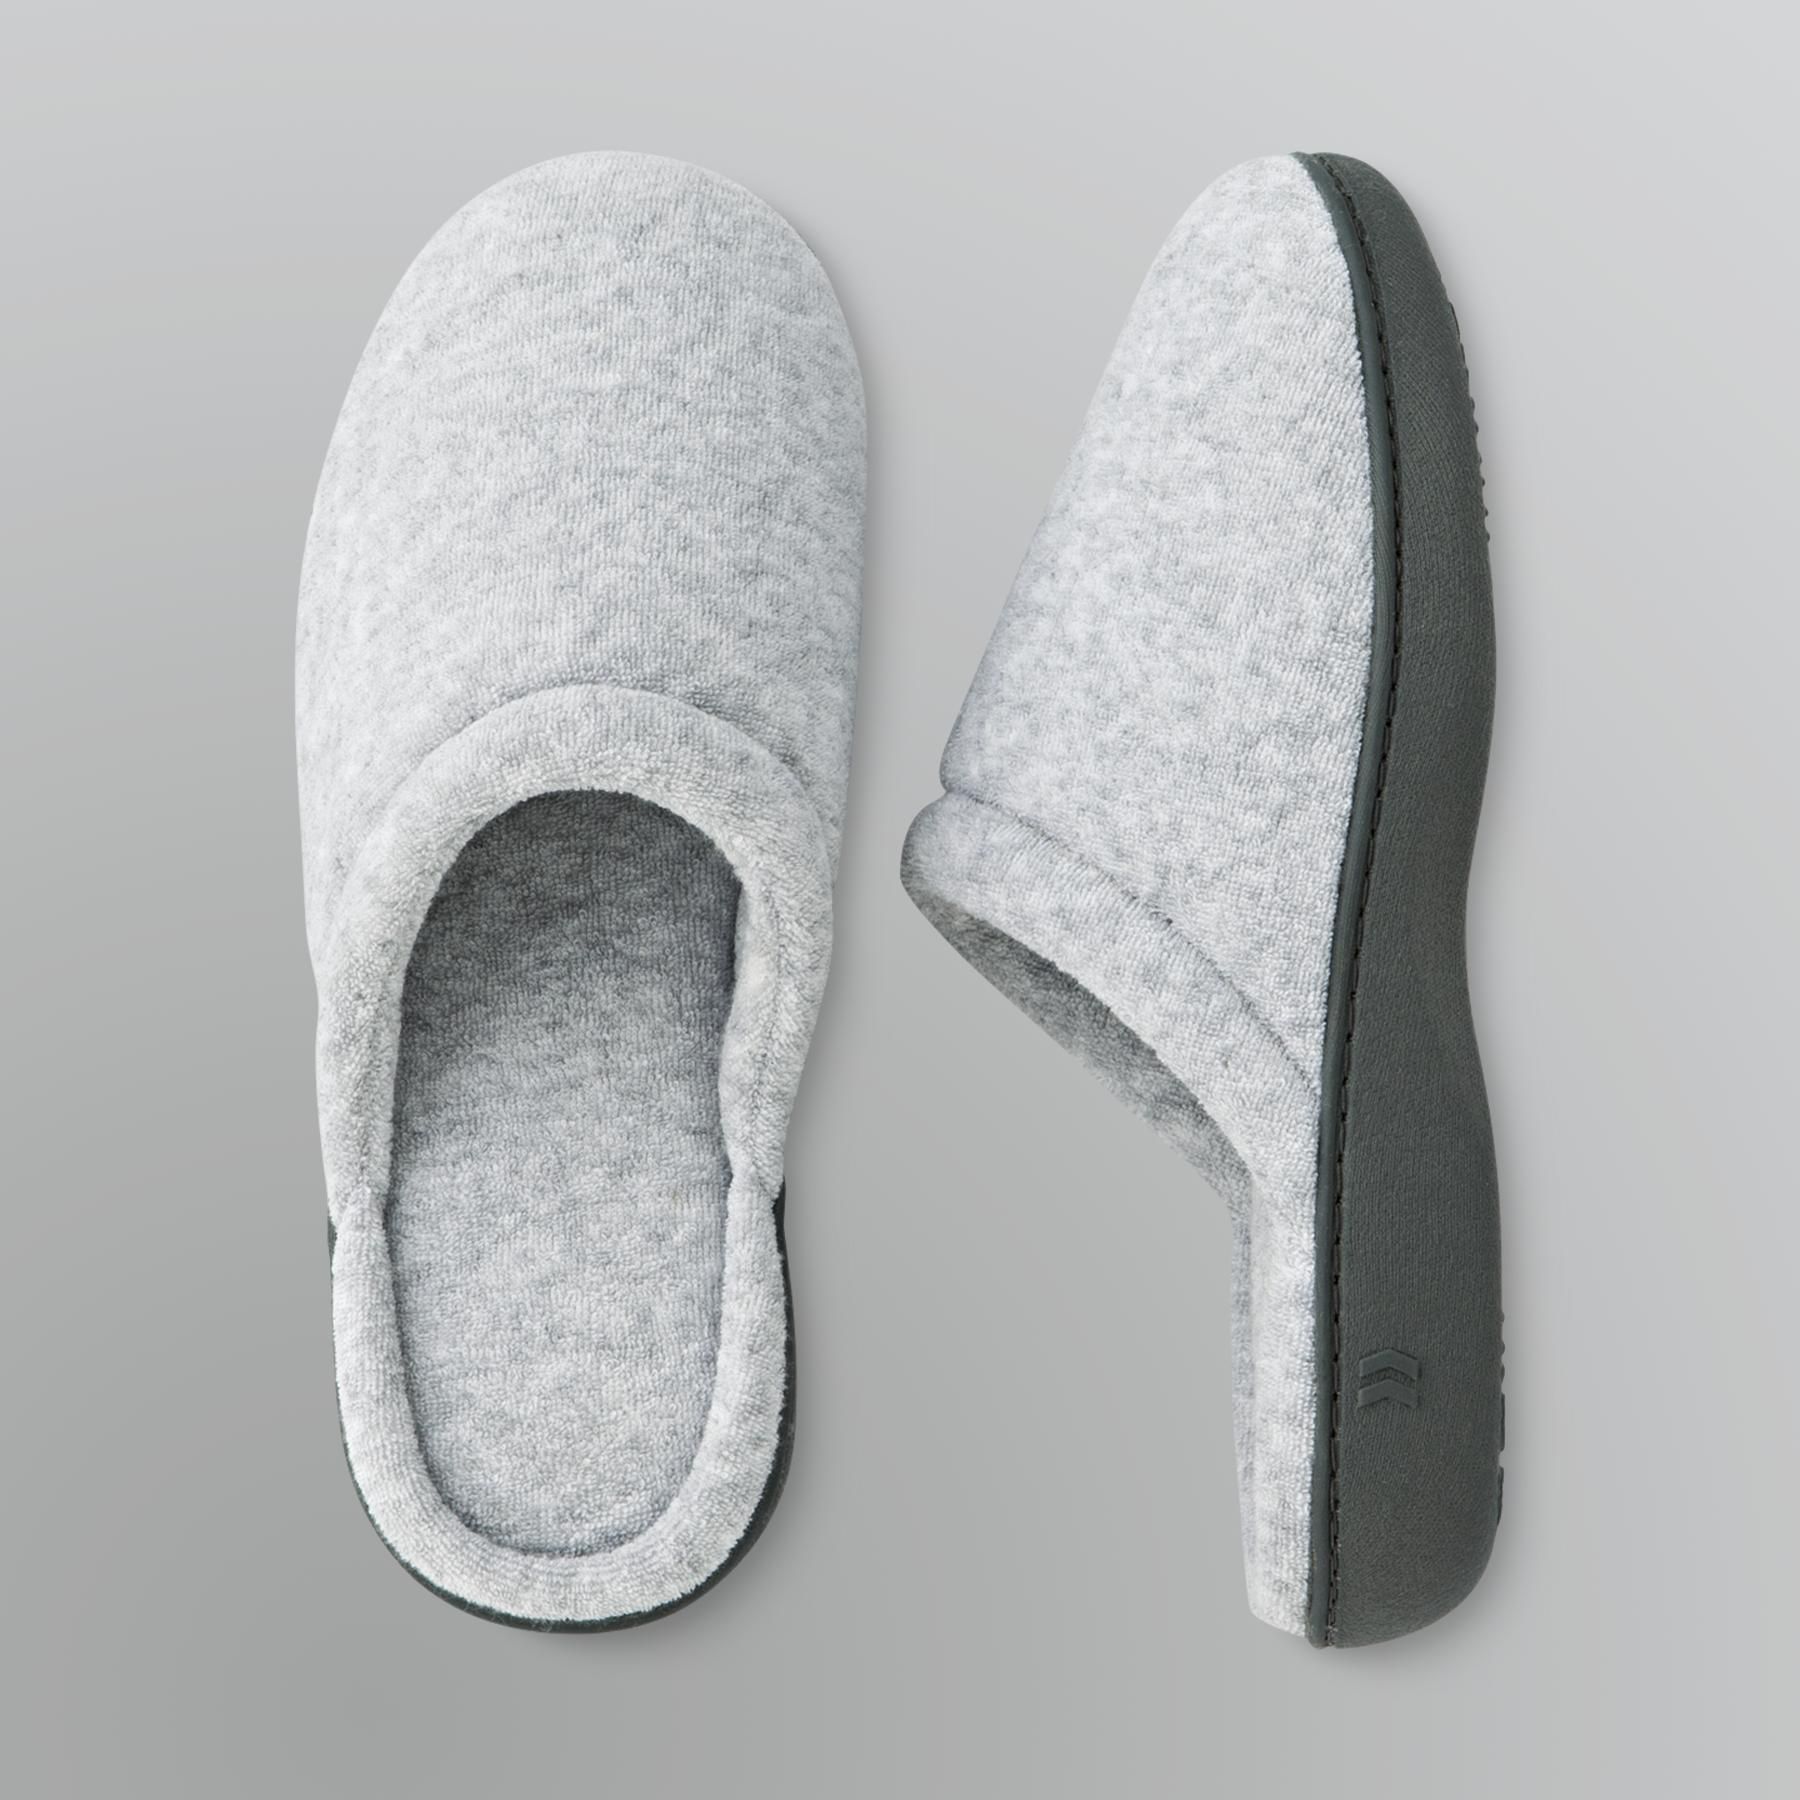 Isotoner Slippers Size Guide